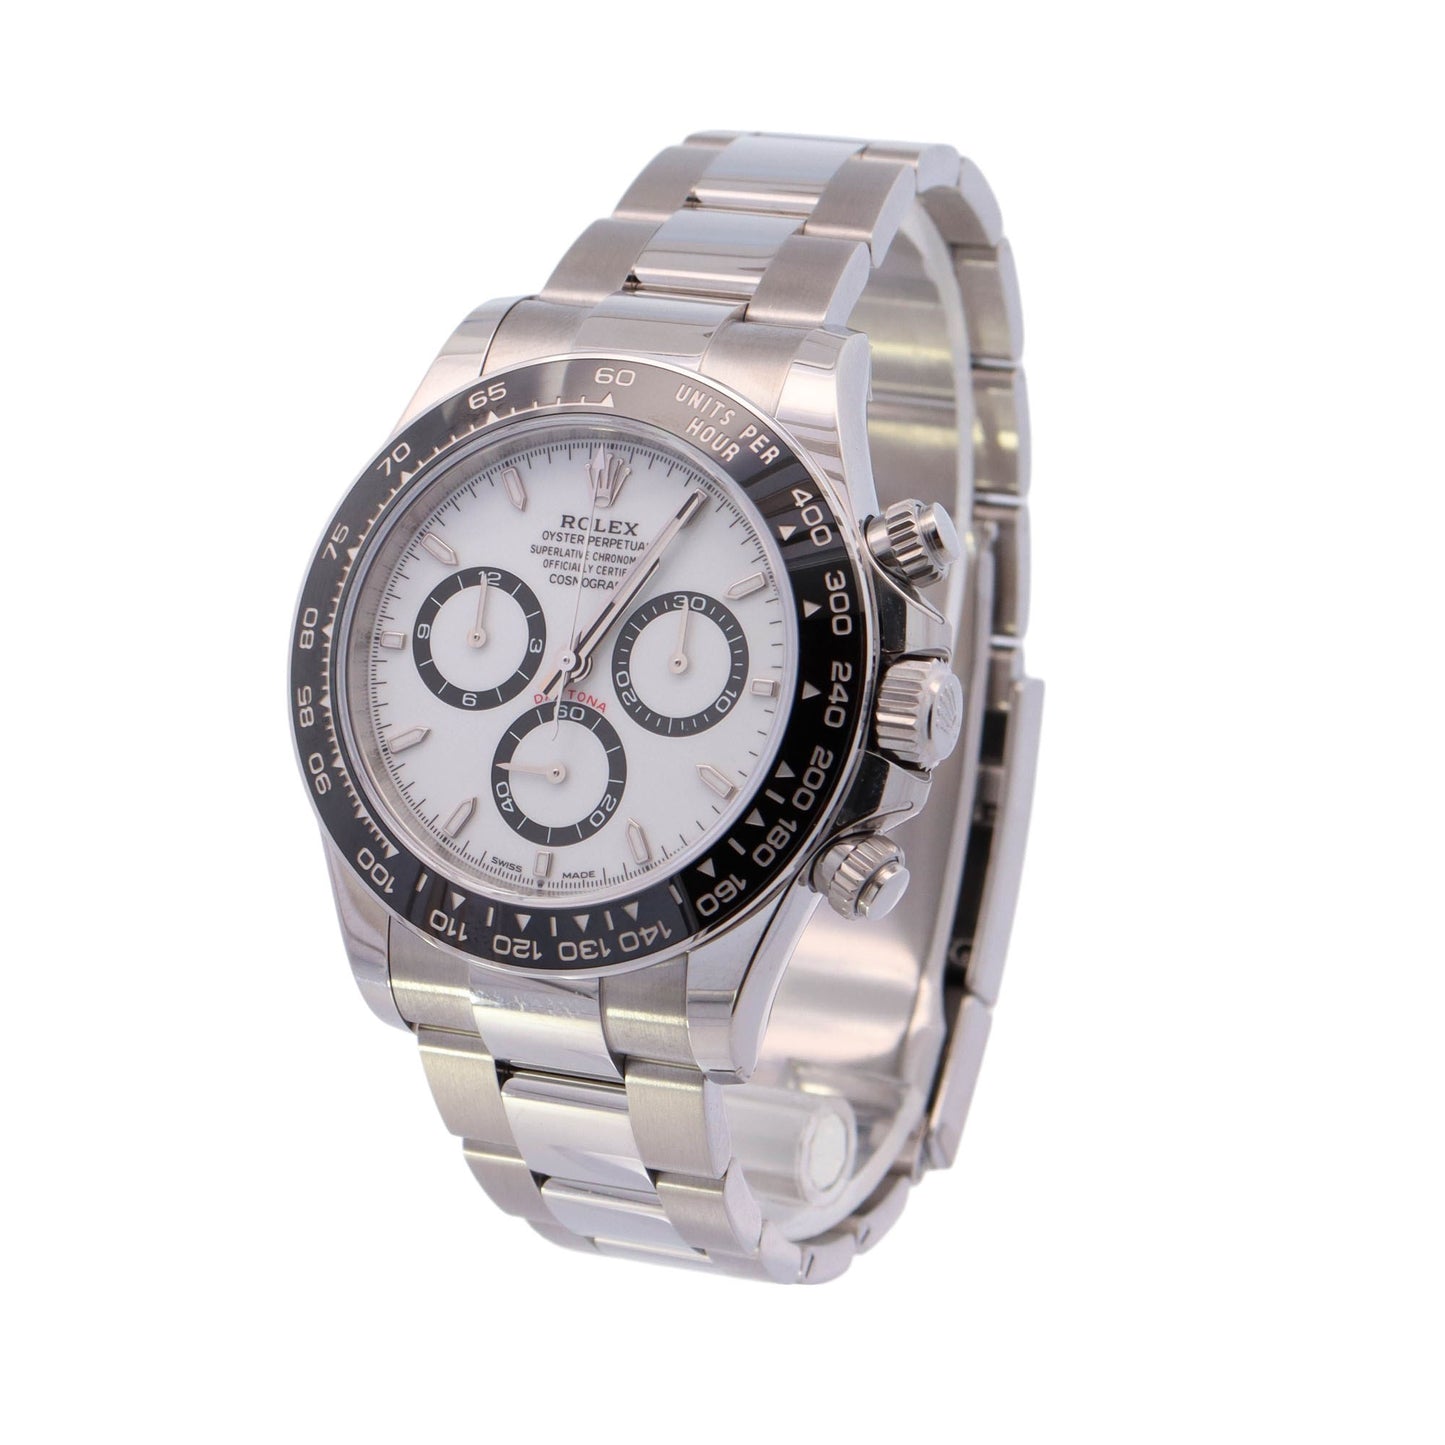 Rolex Daytona "Panda" Stainless Steel 40mm White Chronograph Dial Watch Reference #: 126500LN